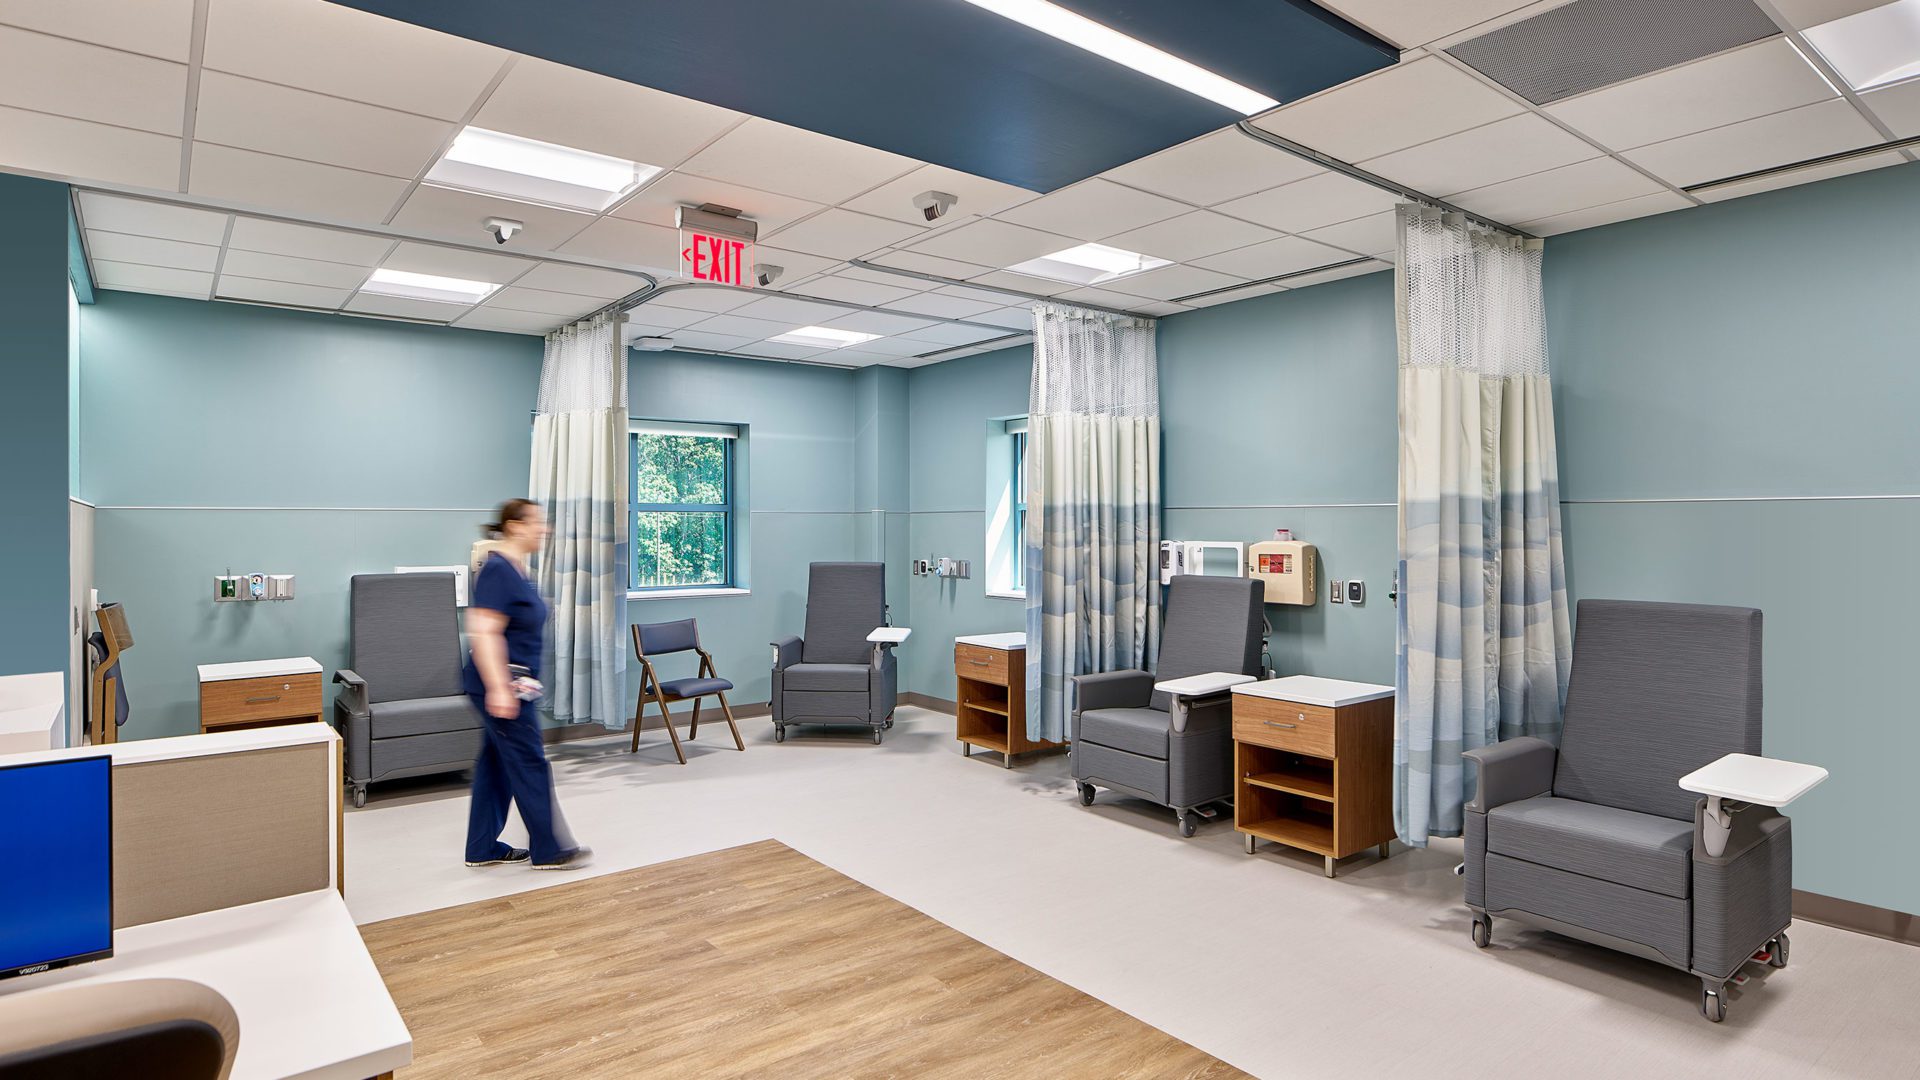 patient care area with curtain barriers